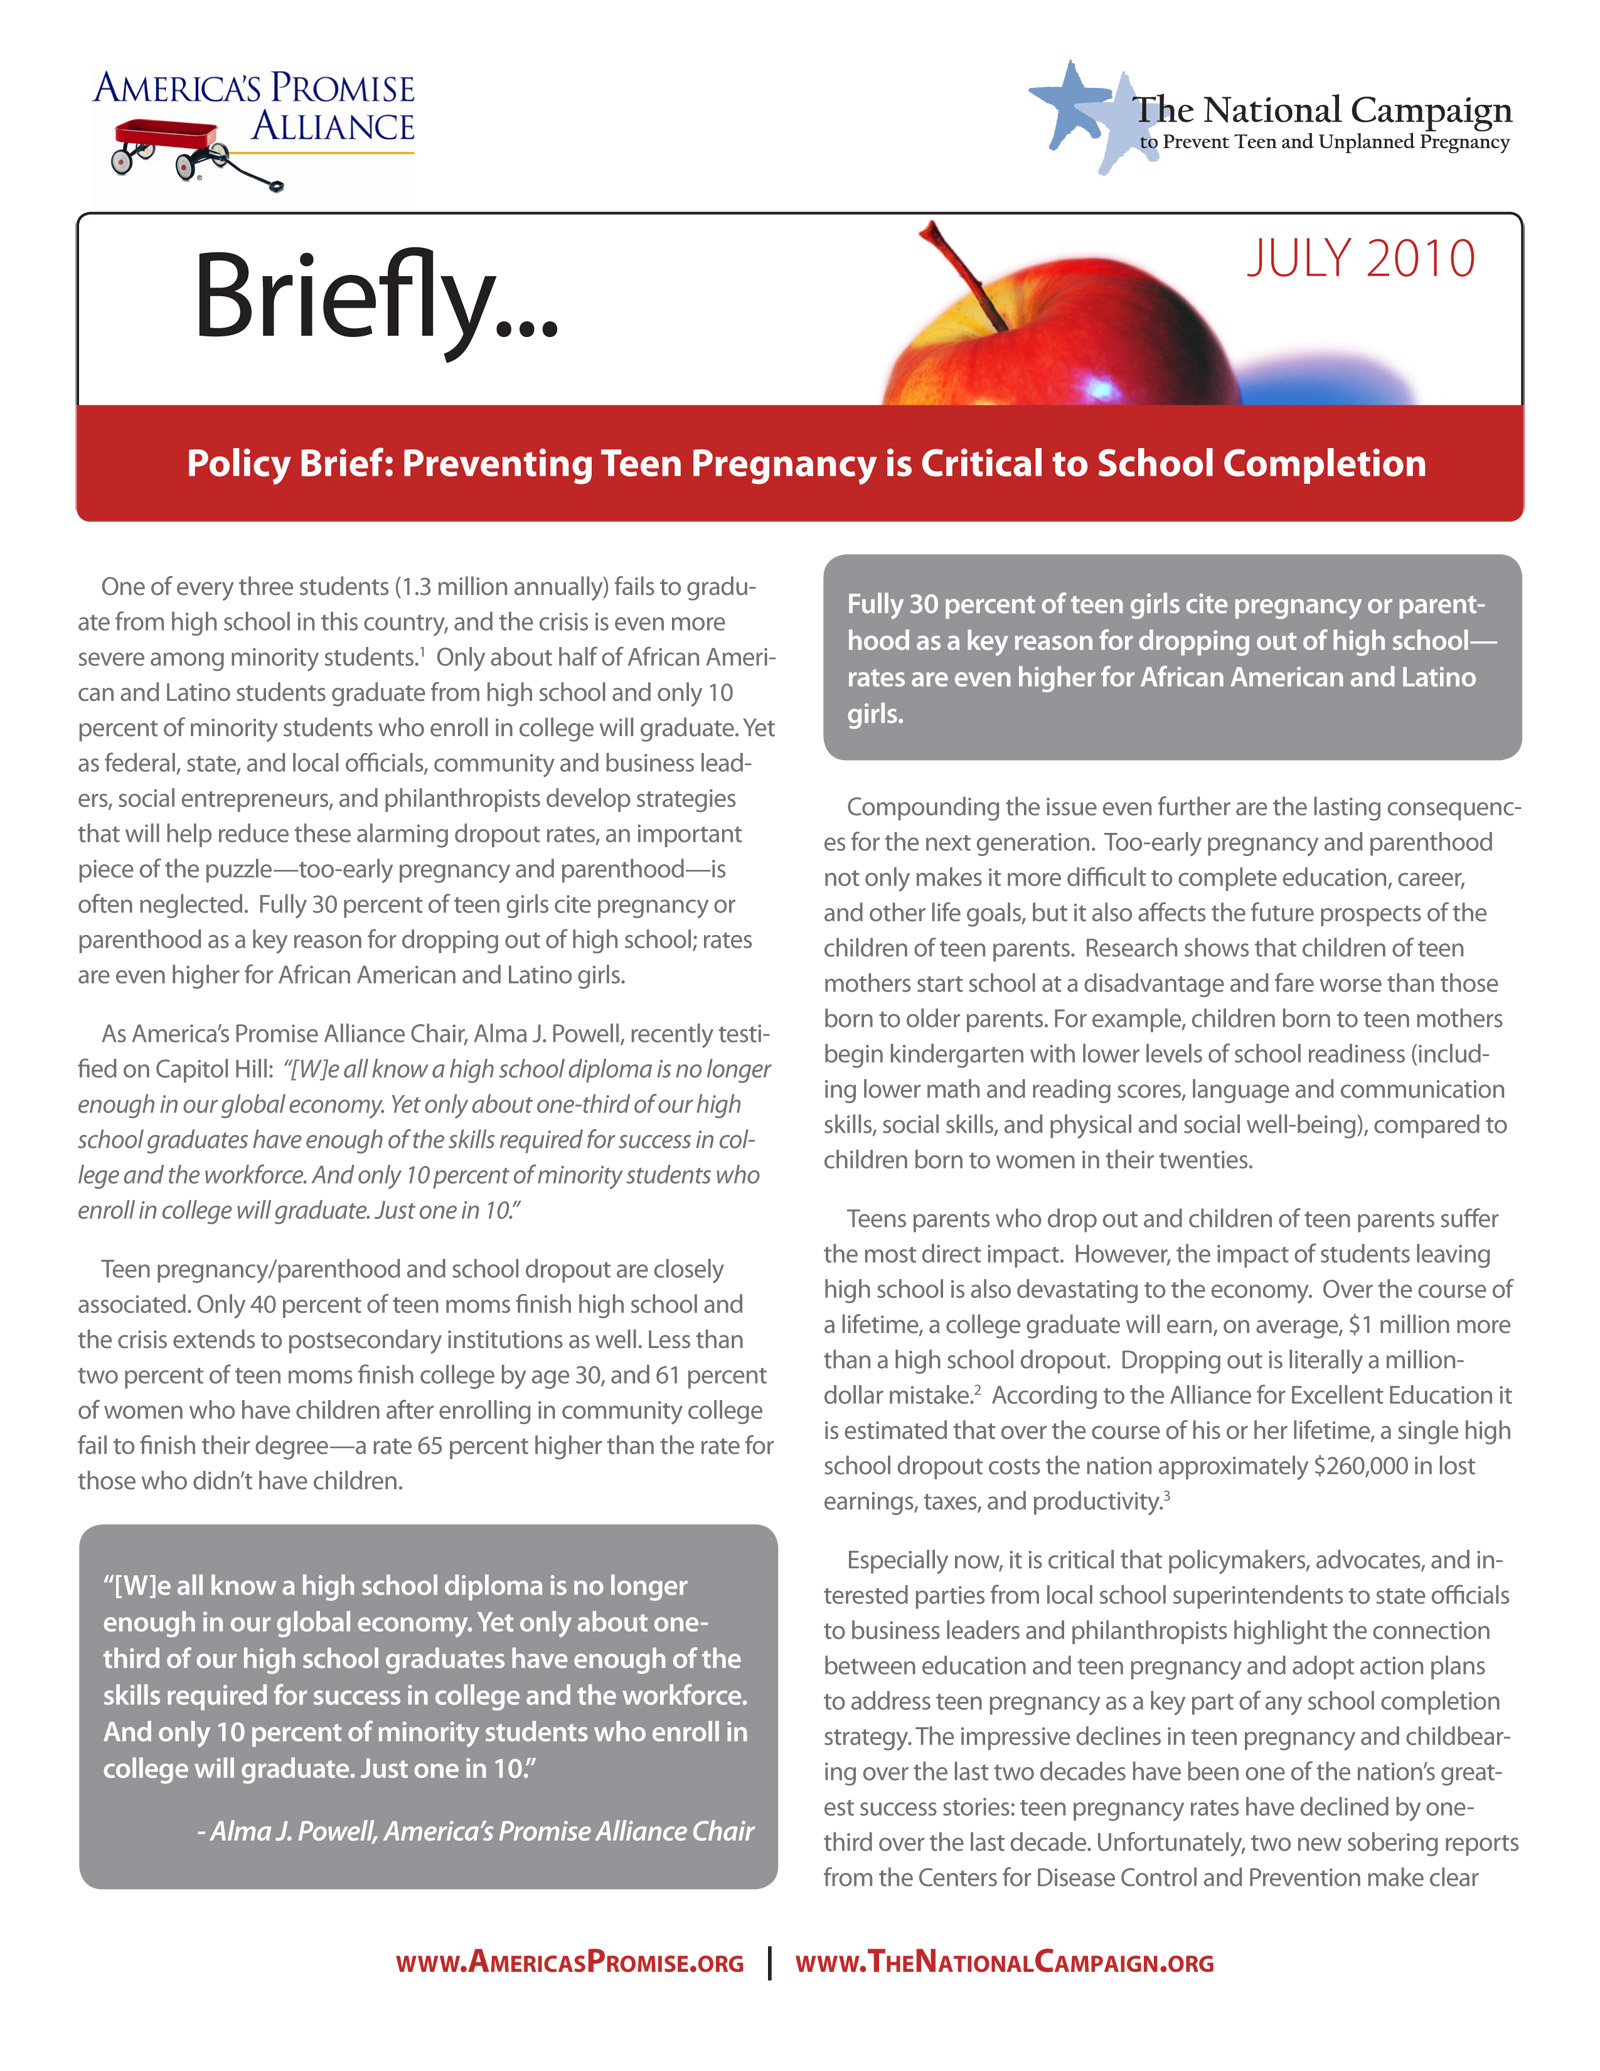 Briefly - Policy Brief: Preventing Teen Pregnancy is Critical to School Completion